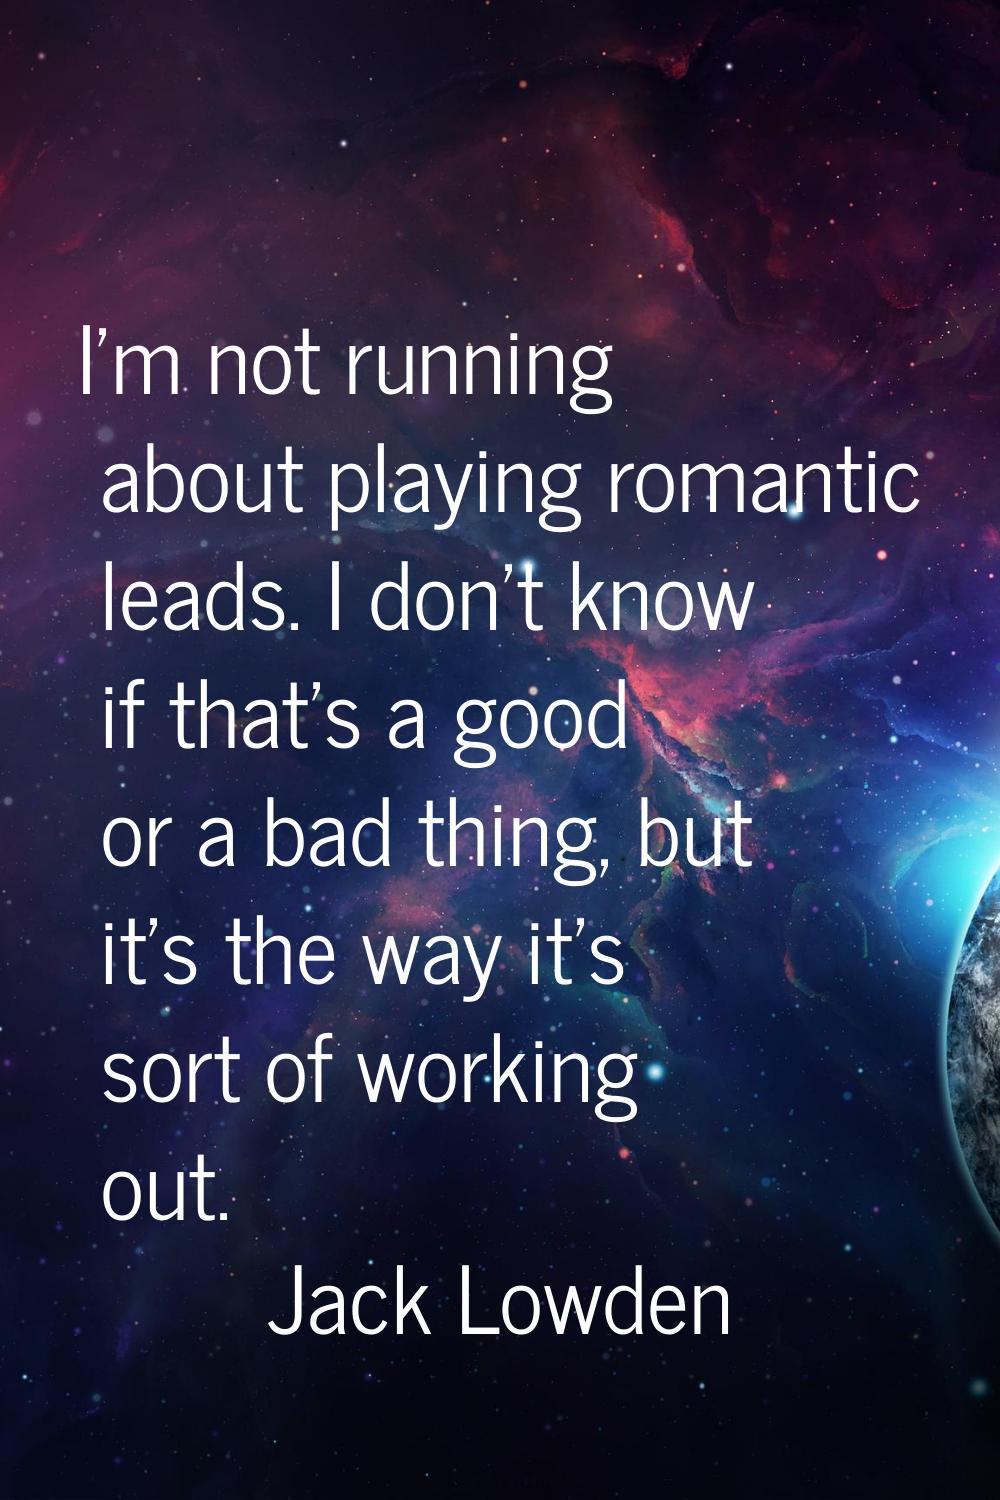 I'm not running about playing romantic leads. I don't know if that's a good or a bad thing, but it'